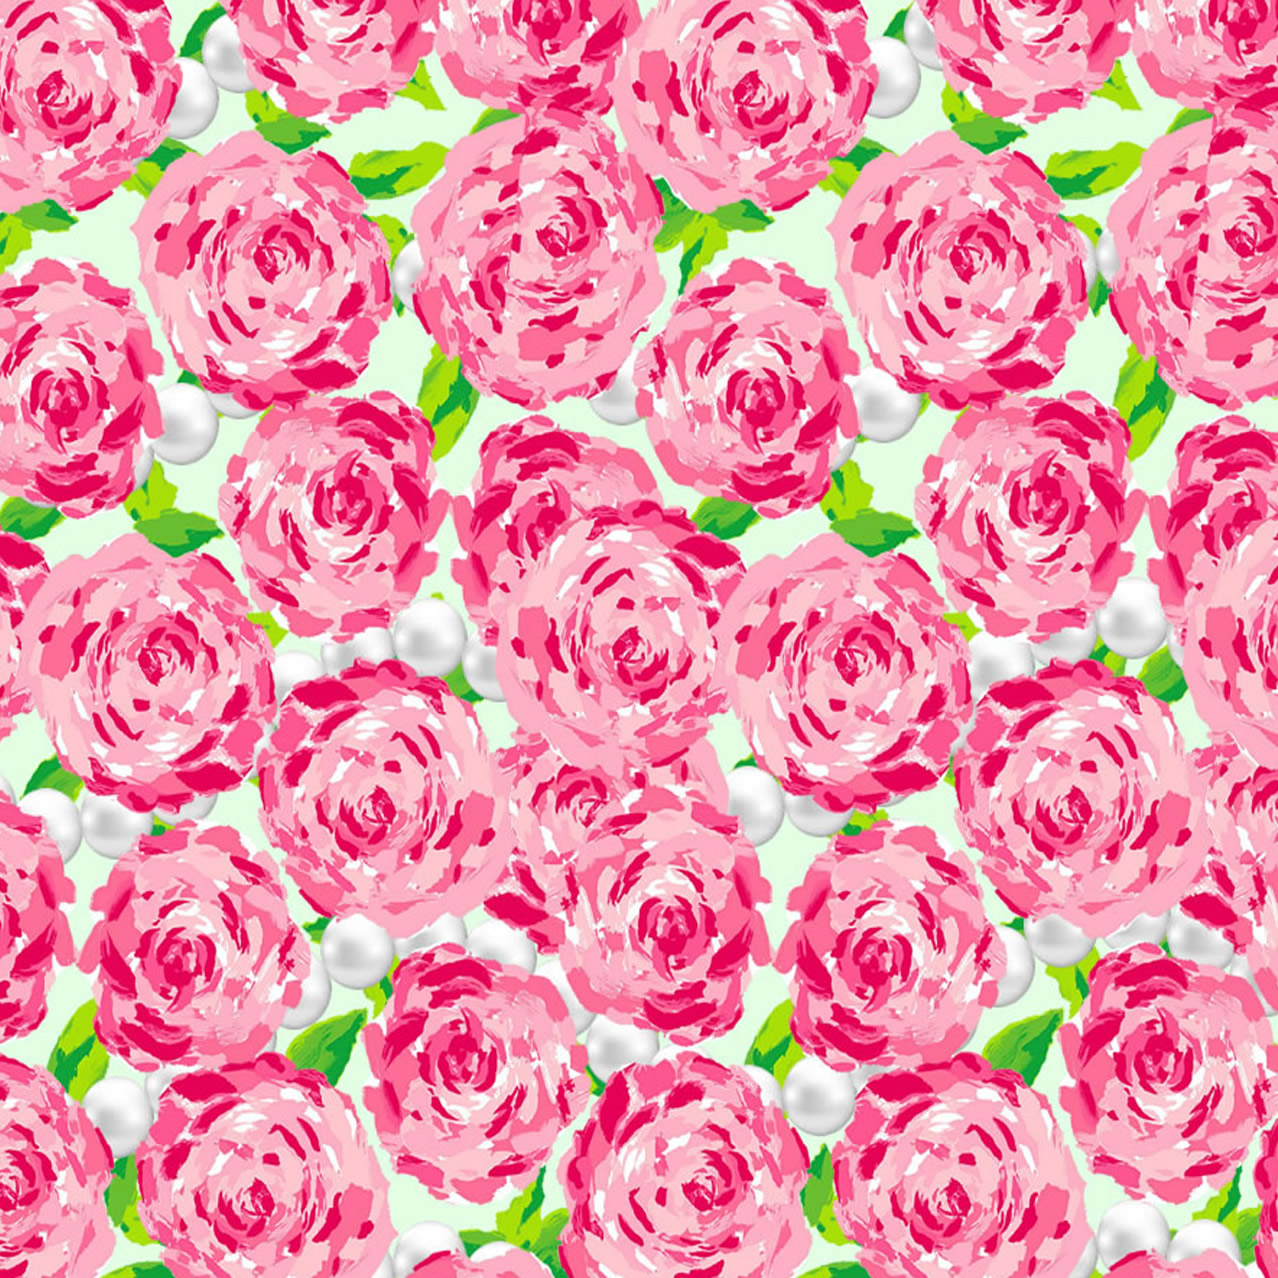 Pearl roses seamless pattern photo